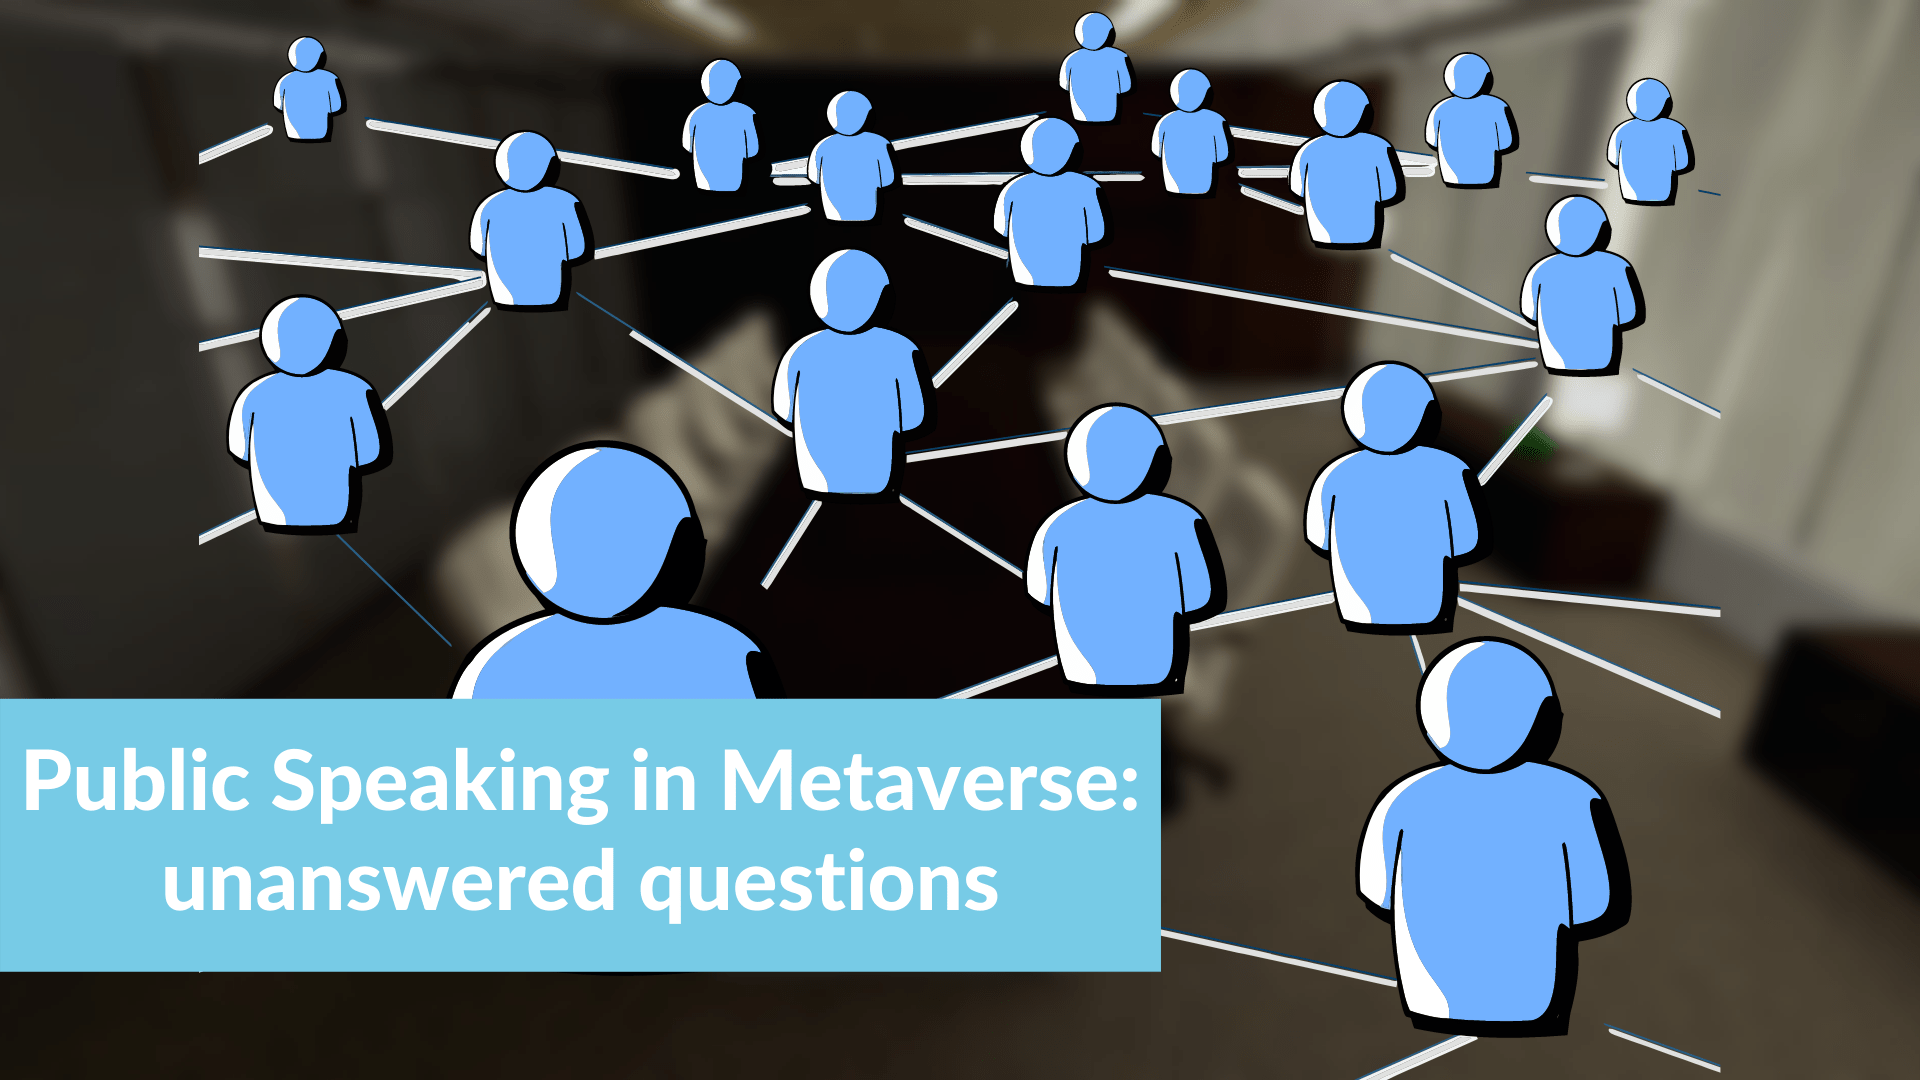 Metaverse – how will it impact public speaking: unanswered questions